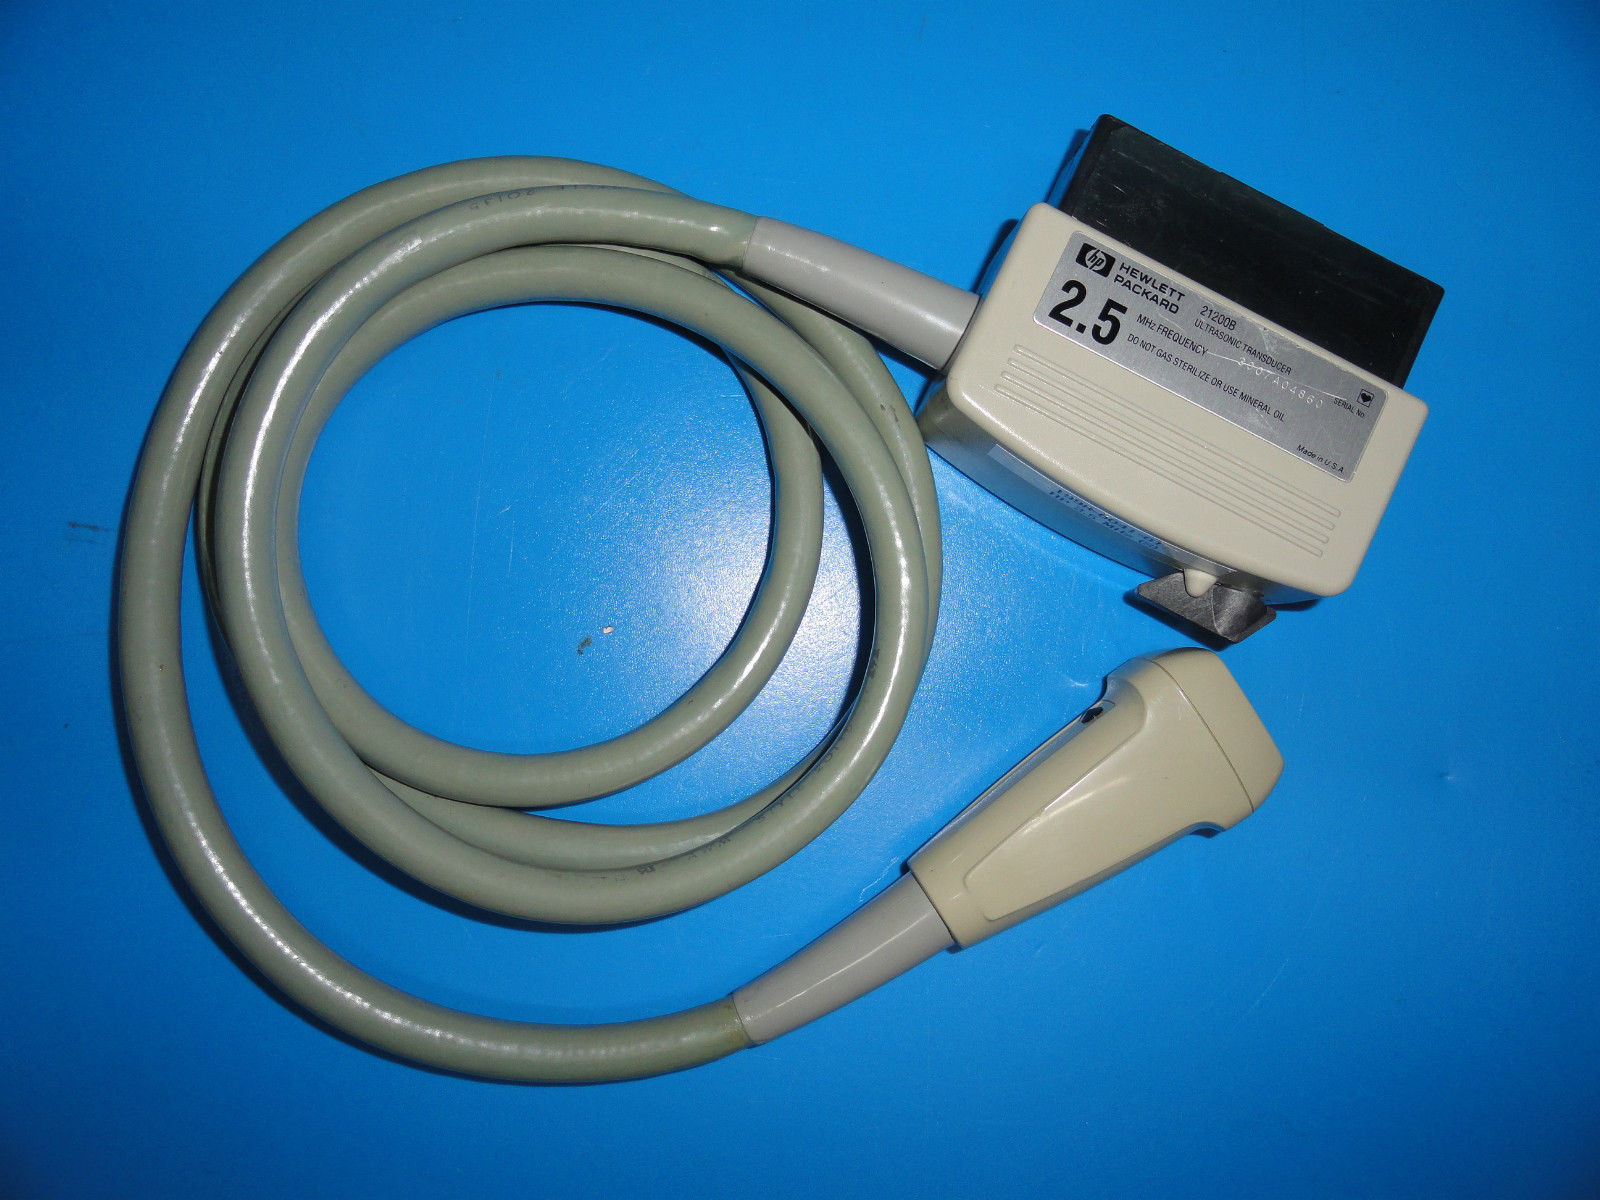 HP 21200B 2.5 MHz P/N 21200-68100 Phased Array Adult Cardiac Probe (3520 & 3526) DIAGNOSTIC ULTRASOUND MACHINES FOR SALE